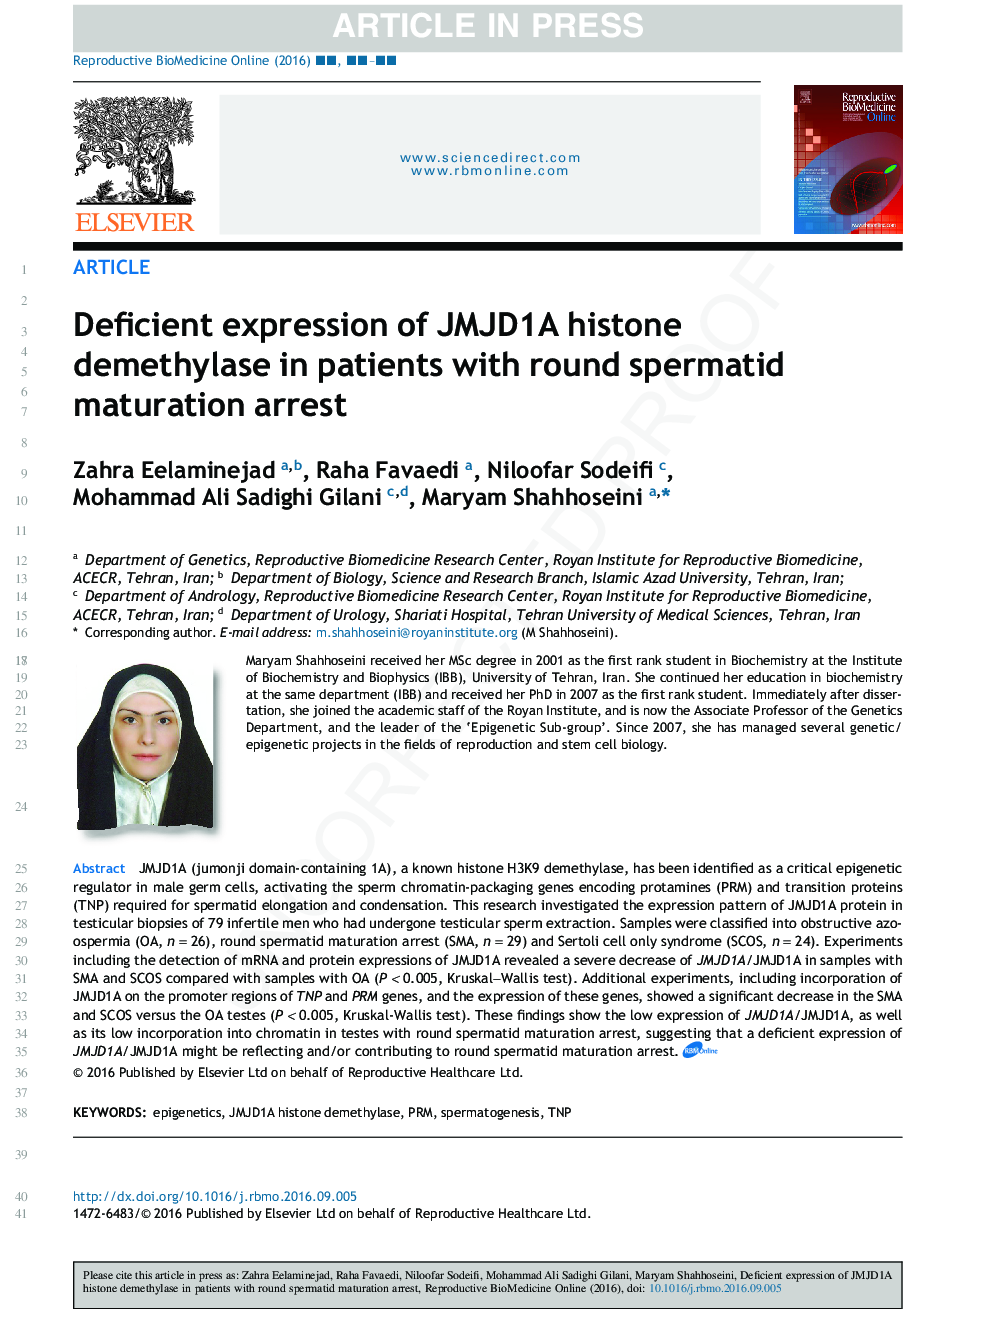 Deficient expression of JMJD1A histone demethylase in patients with round spermatid maturation arrest